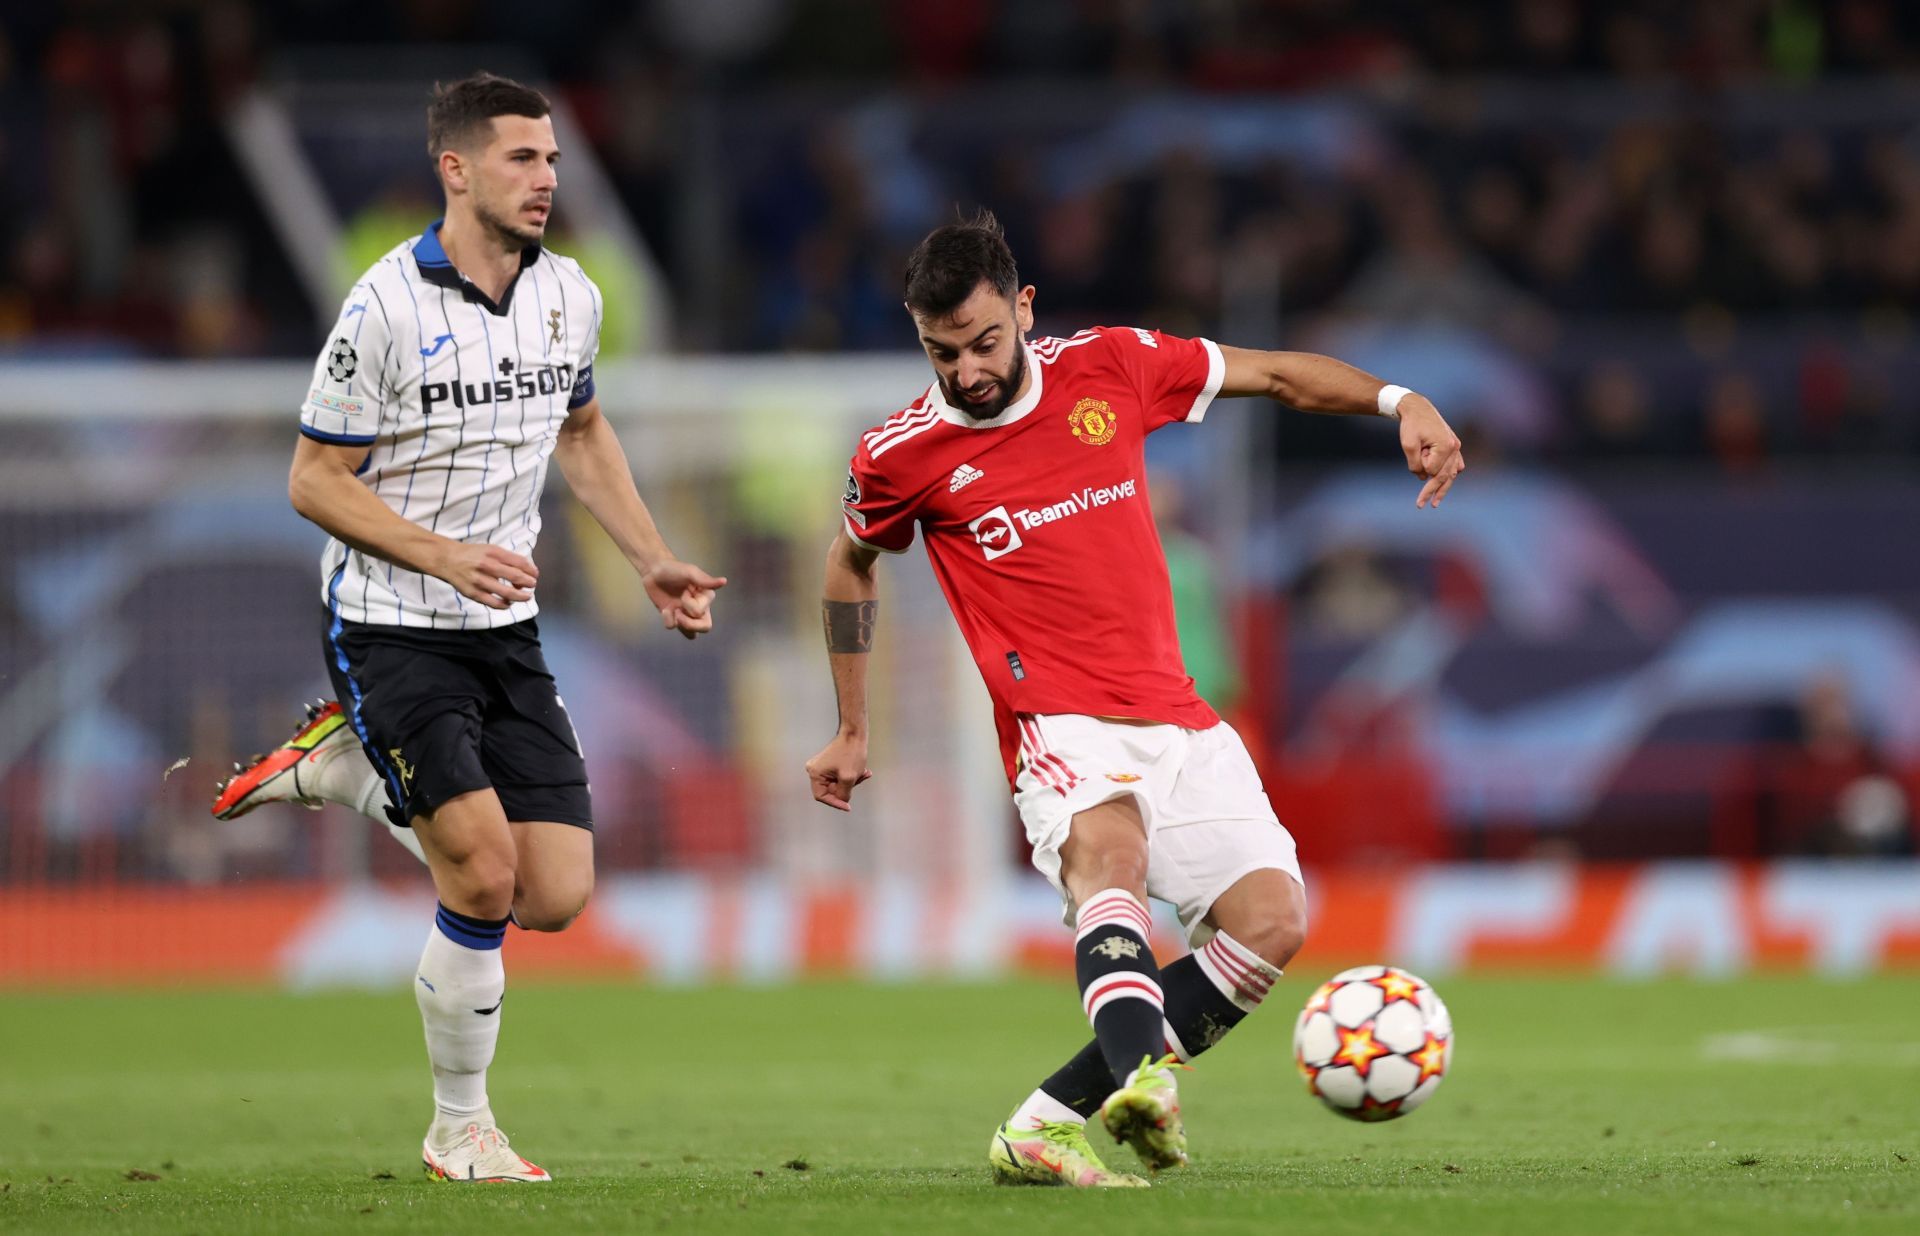 Bruno Fernandes wanted to leave Manchester United because of their involvement in the Super League.